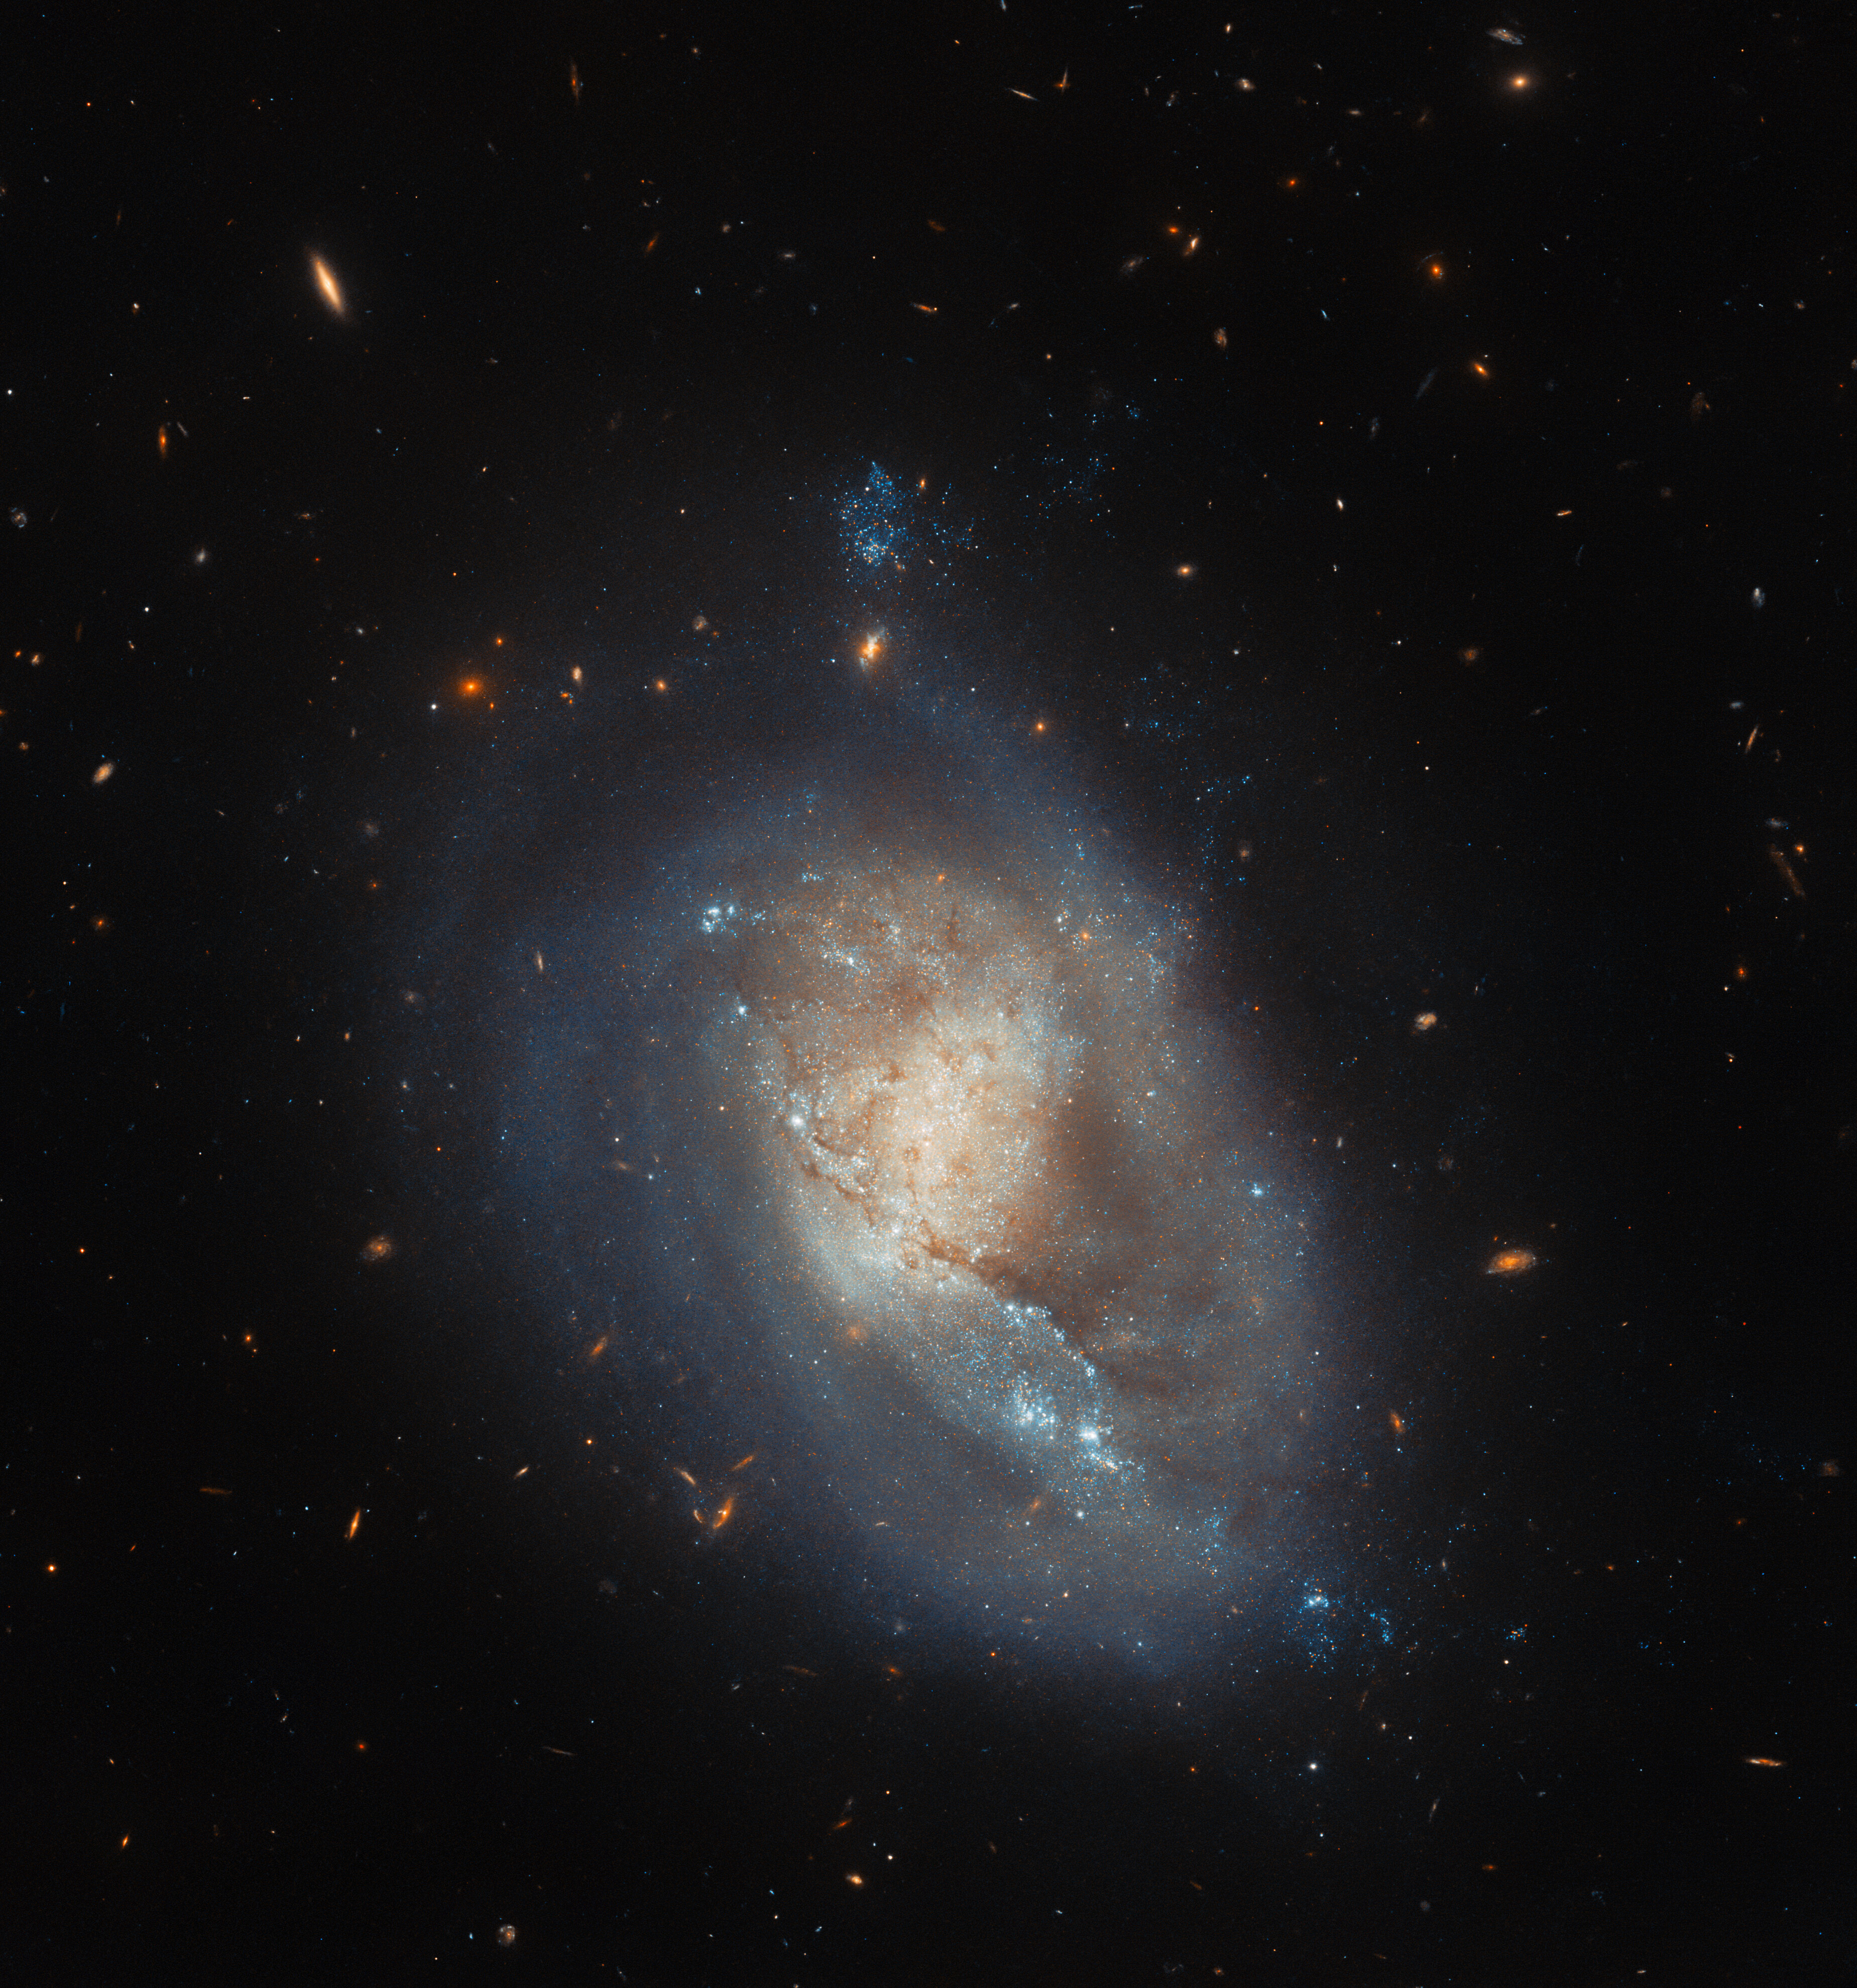 A dwarf spiral galaxy. The center is not particularly bright and is covered by some dust, while the outer disc and halo wrap around as if swirling in water. Across the face of the galaxy, an arc of brightly glowing spots marks areas where new stars are forming. The galaxy is surrounded by tiny, distant galaxies on a dark background.